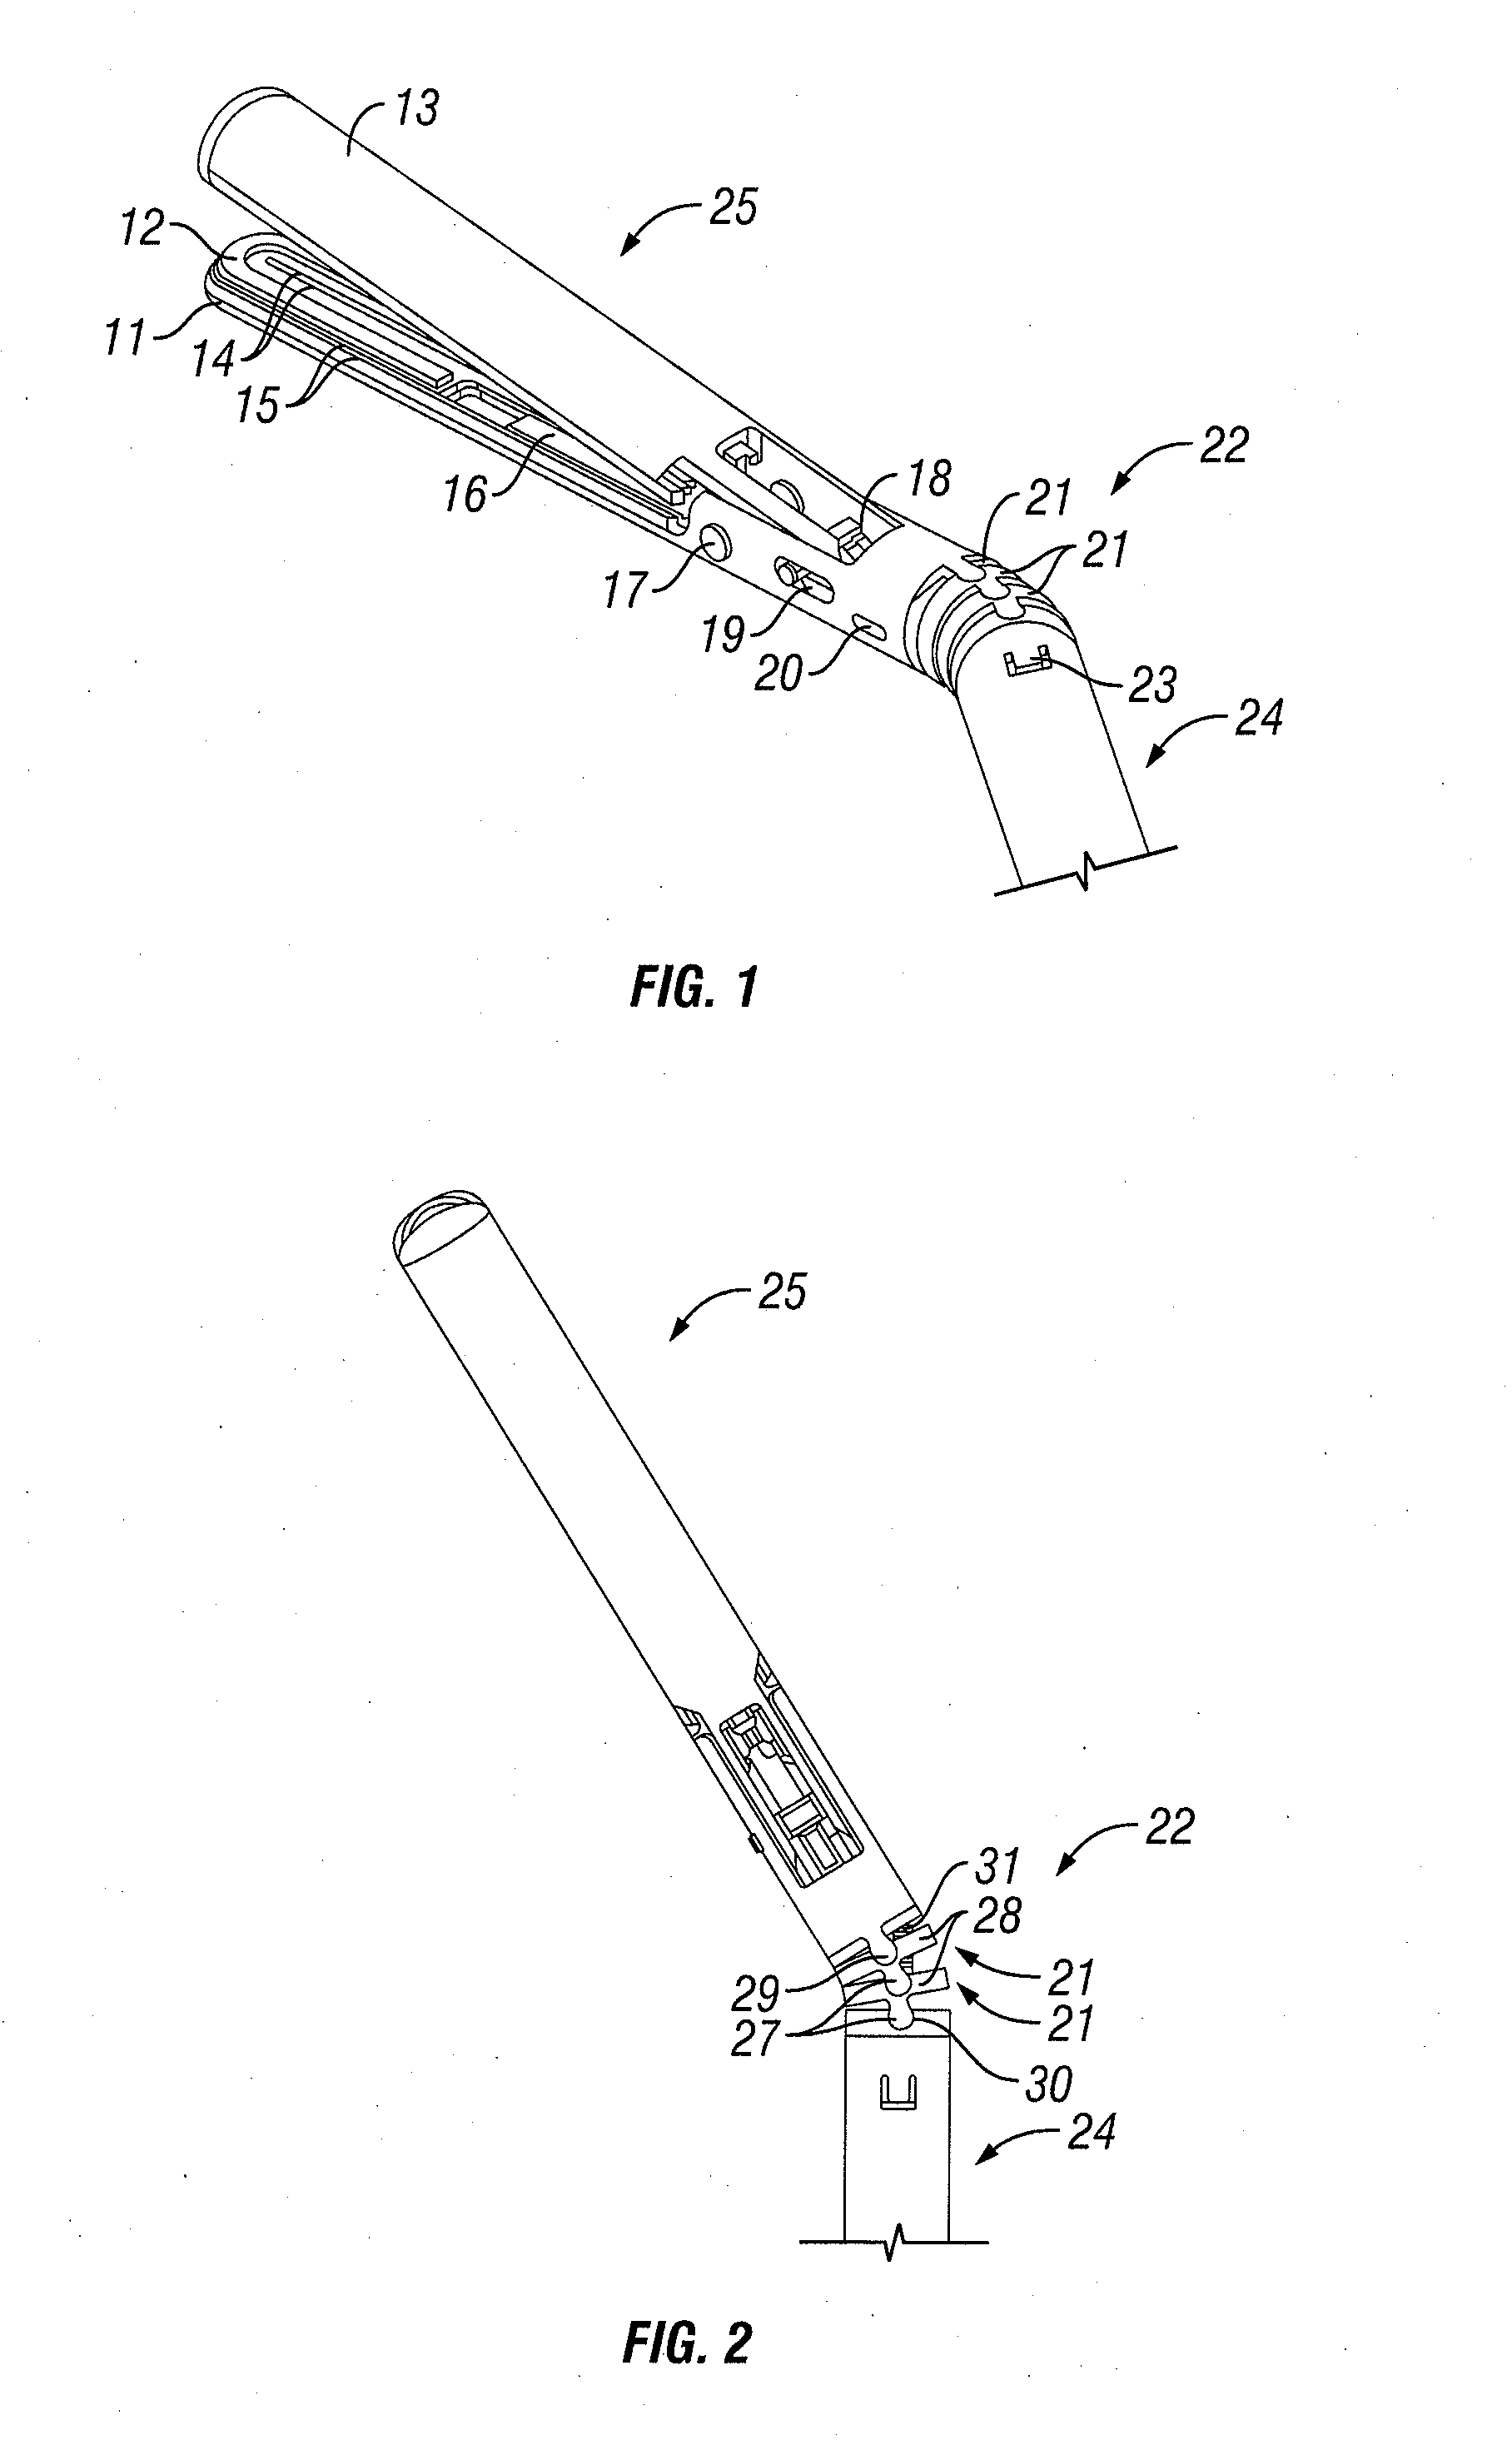 Method and apparatus for articulating the wrist of a laparoscopic grasping instrument